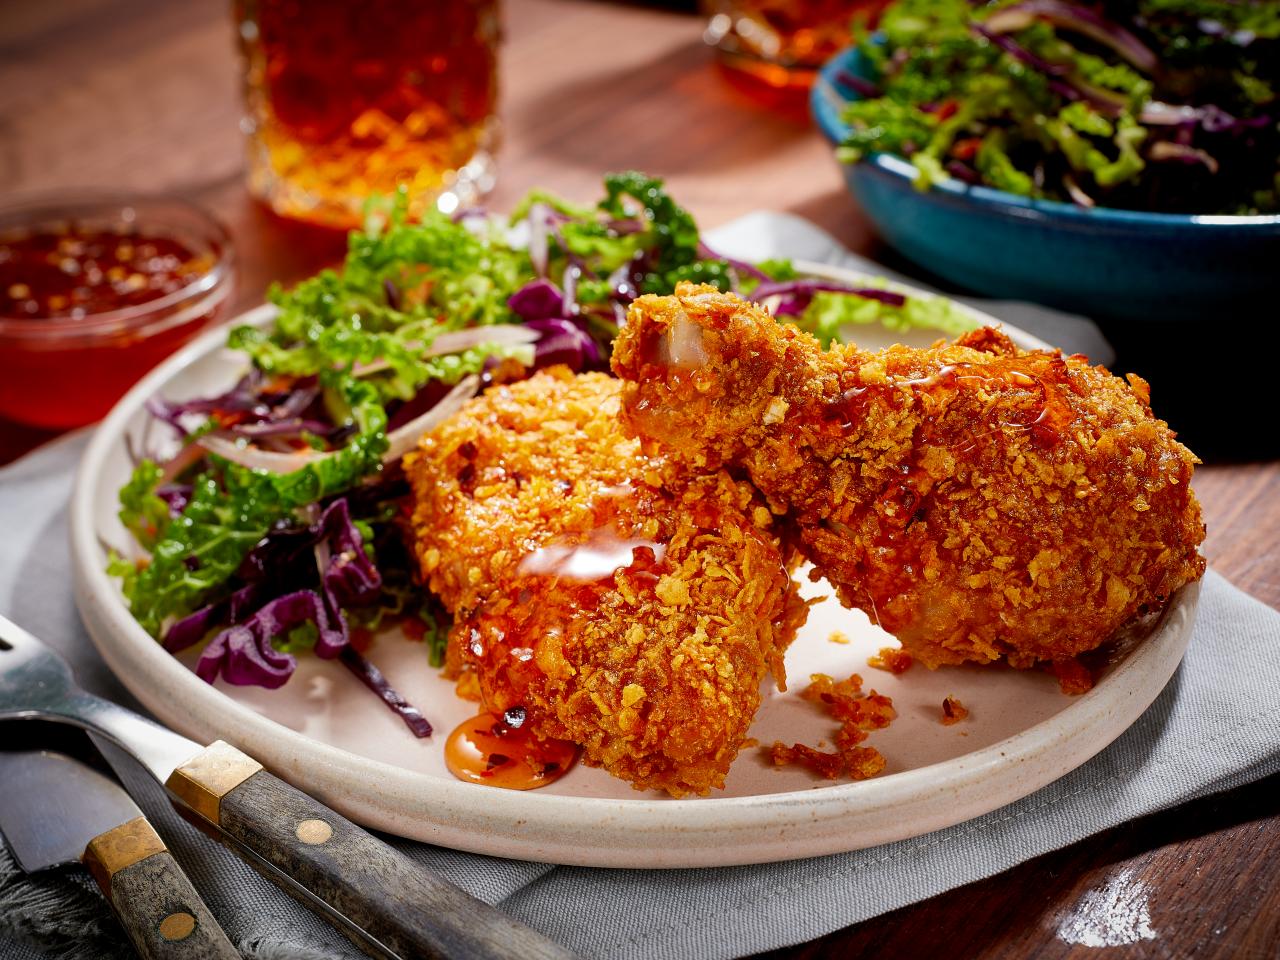 https://food.fnr.sndimg.com/content/dam/images/food/fullset/2022/01/28/0/FPLF114FH_mary-berg-oven-fried-chicken-with-spicy-honey-and-slaw-2_s4x3.jpg.rend.hgtvcom.1280.960.suffix/1643383859474.jpeg